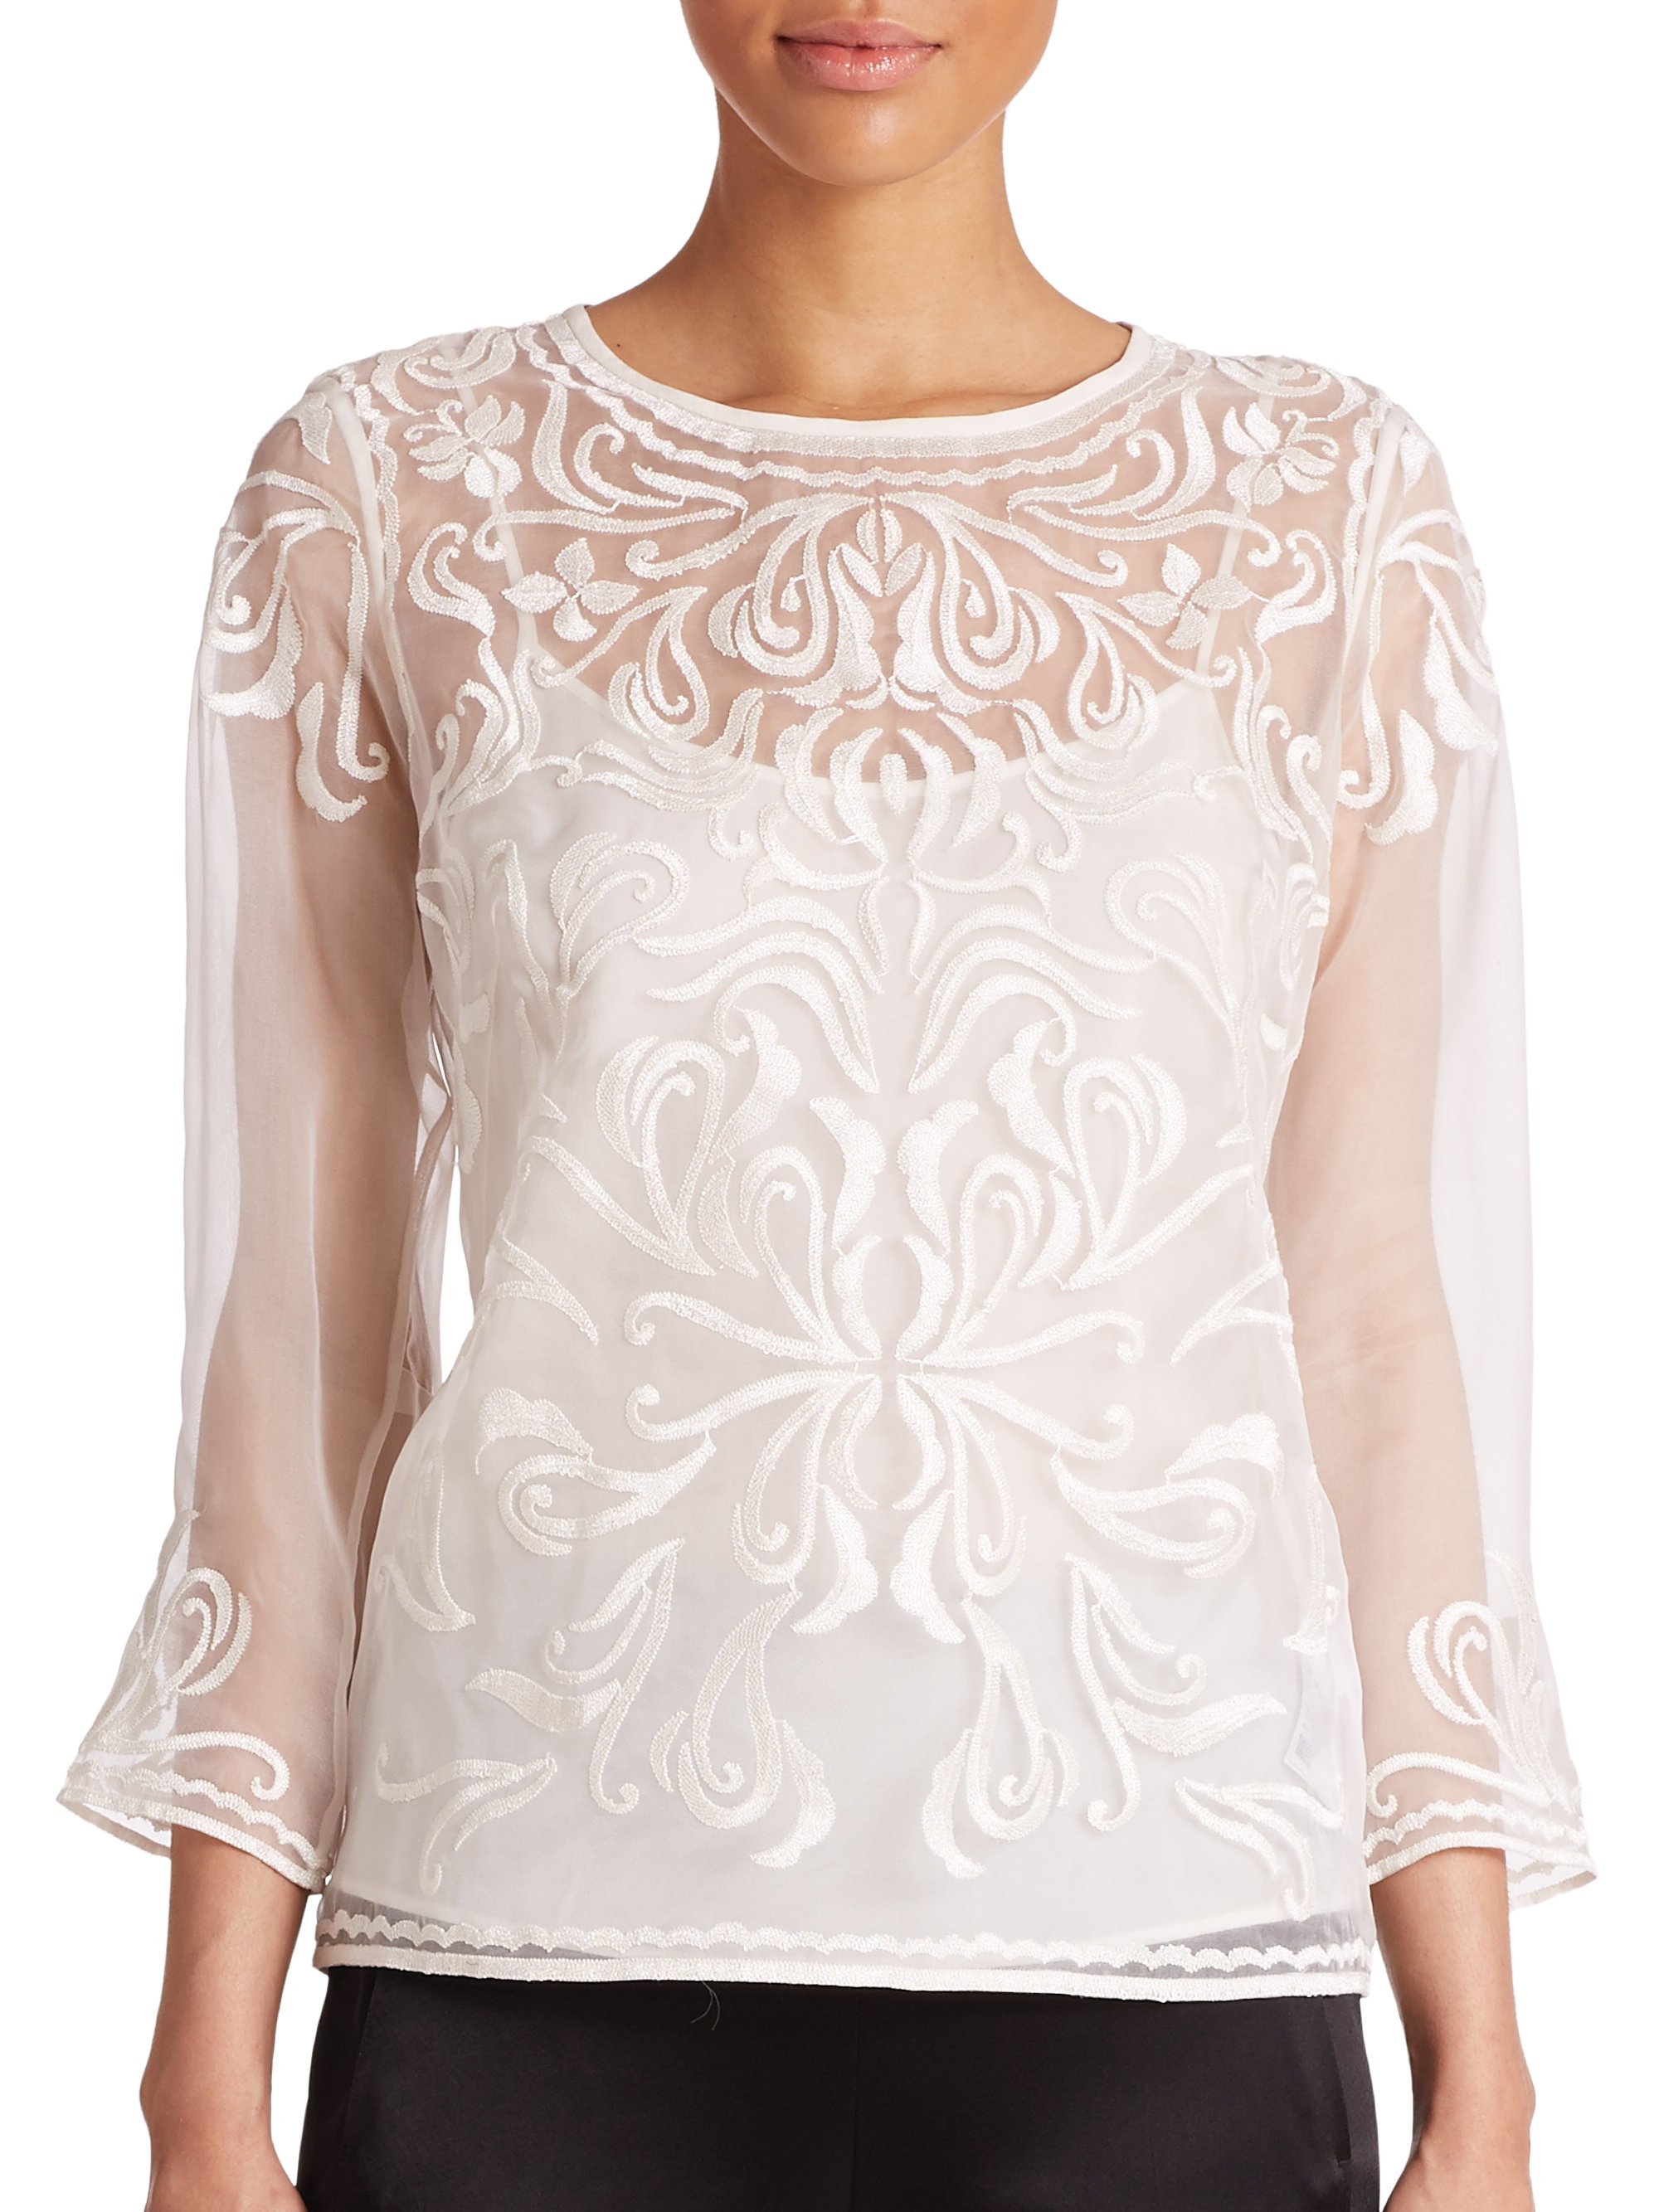 Lyst - Escada Embroidered Sheer Blouse in White